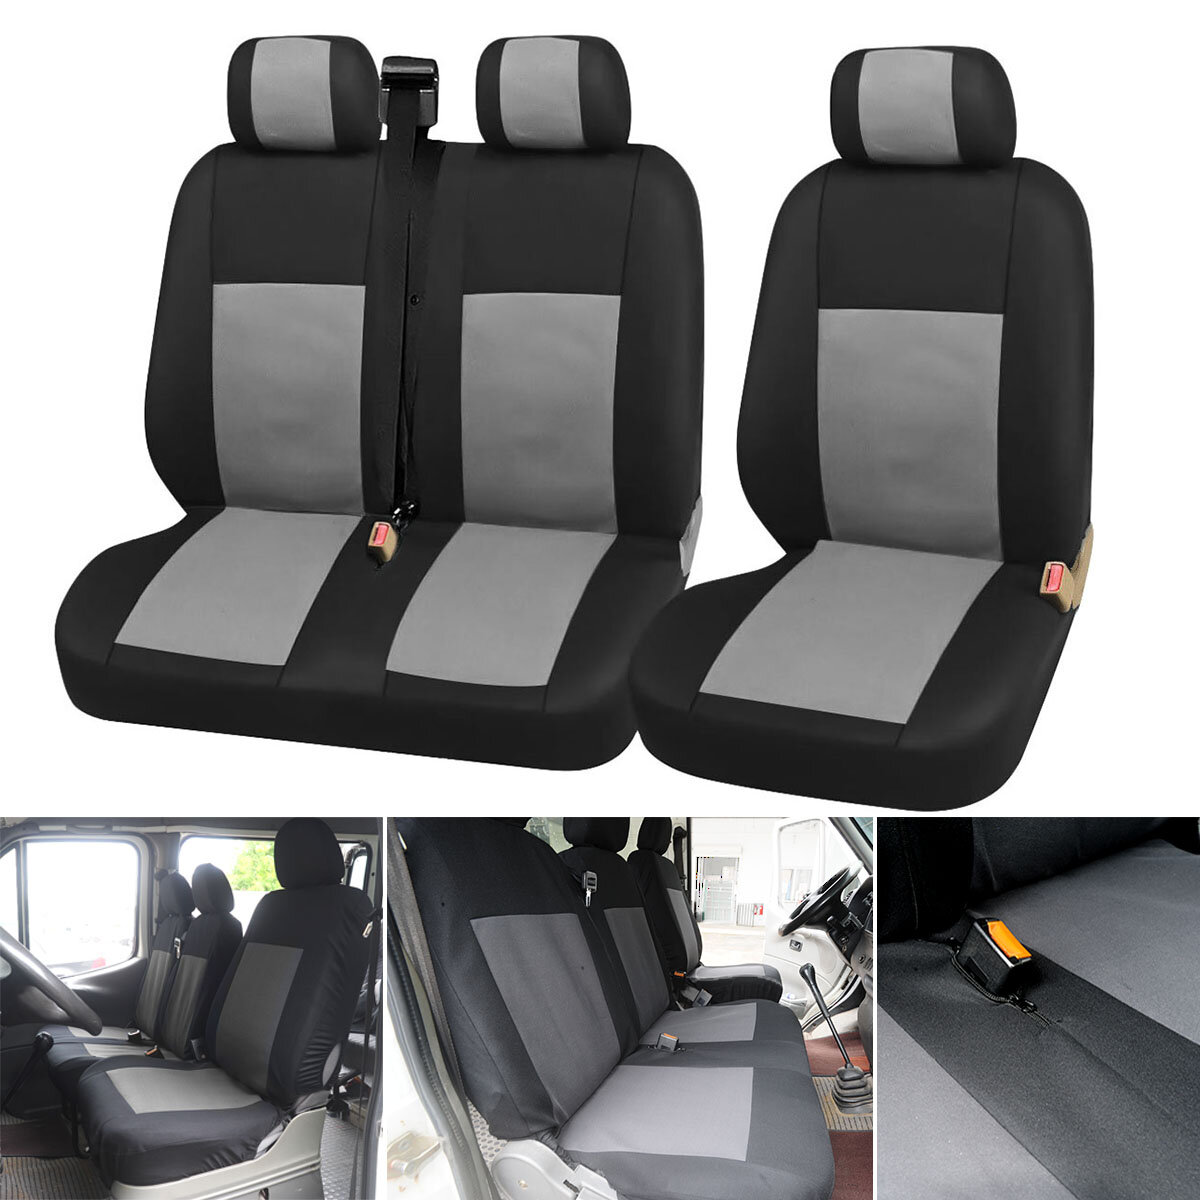 FORD TRANSIT PANEL MK7 Heavy Duty Leather Look Van Seat Cover Protectors 2+1 